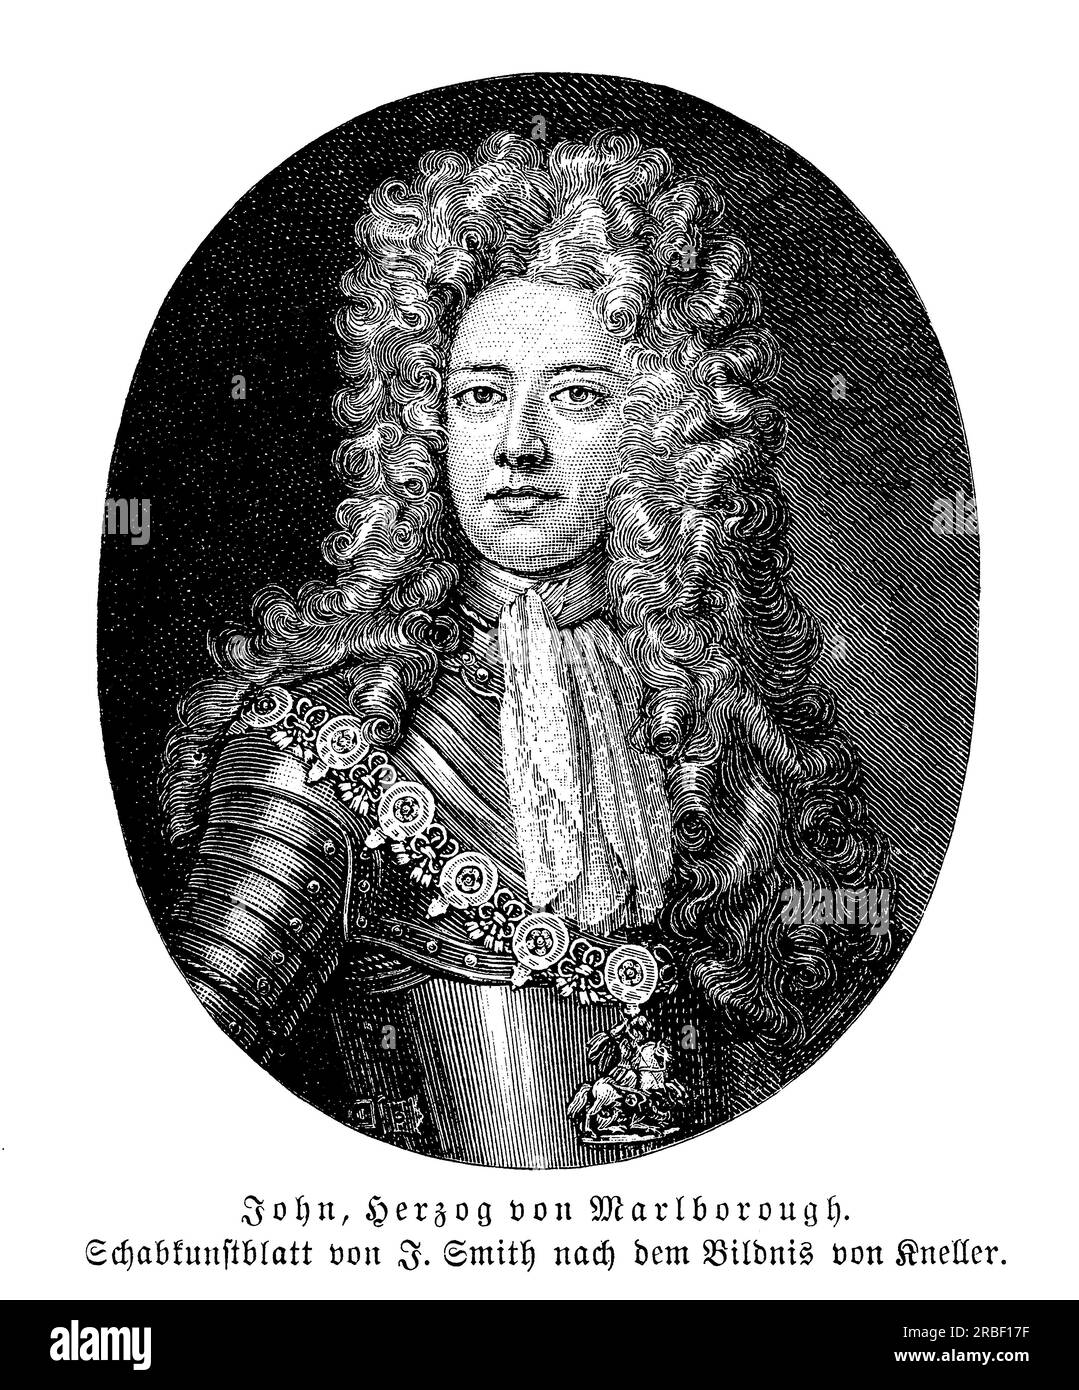 John Churchill, 1st Duke of Marlborough, was a British military commander who served during the early 18th century. He is known for his victories in several major battles, including the Battle of Blenheim, the Battle of Ramillies, and the Battle of Oudenarde. Marlborough was also a skilled diplomat and played a key role in the War of the Spanish Succession, helping to secure the English and Dutch thrones for the House of Hanover. Despite his military successes, Marlborough was also a controversial figure, and he faced political opposition and personal scandals throughout his career Stock Photo